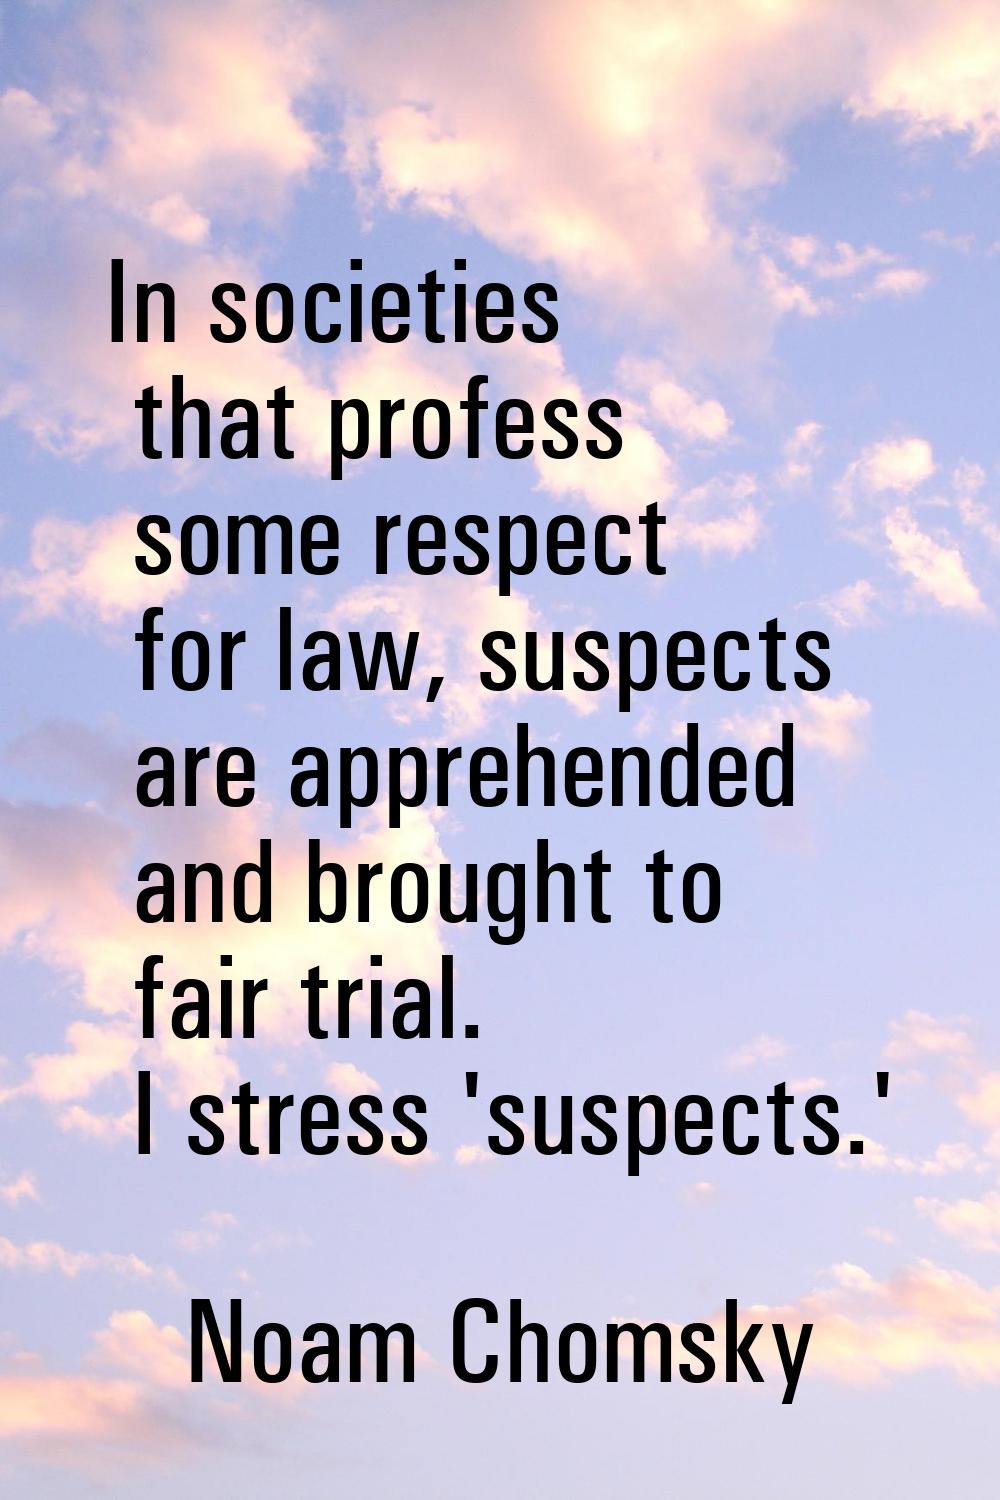 In societies that profess some respect for law, suspects are apprehended and brought to fair trial.